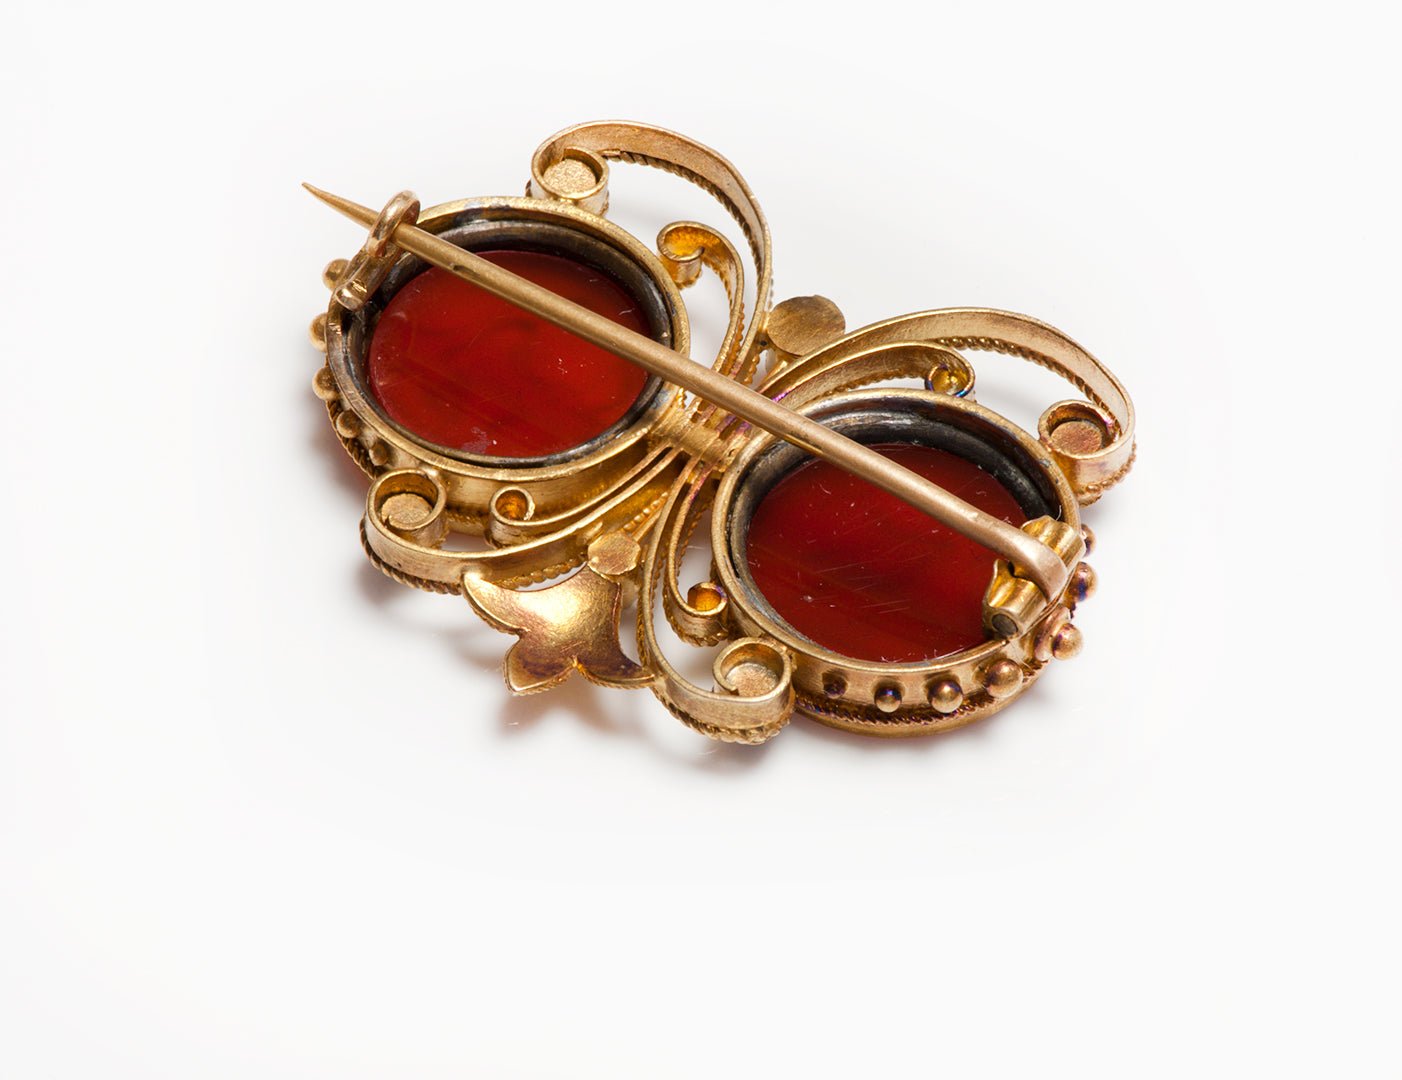 Antique Etruscan Revival Gold Carnelian Intaglio Sapphire Brooch - DSF Antique Jewelry